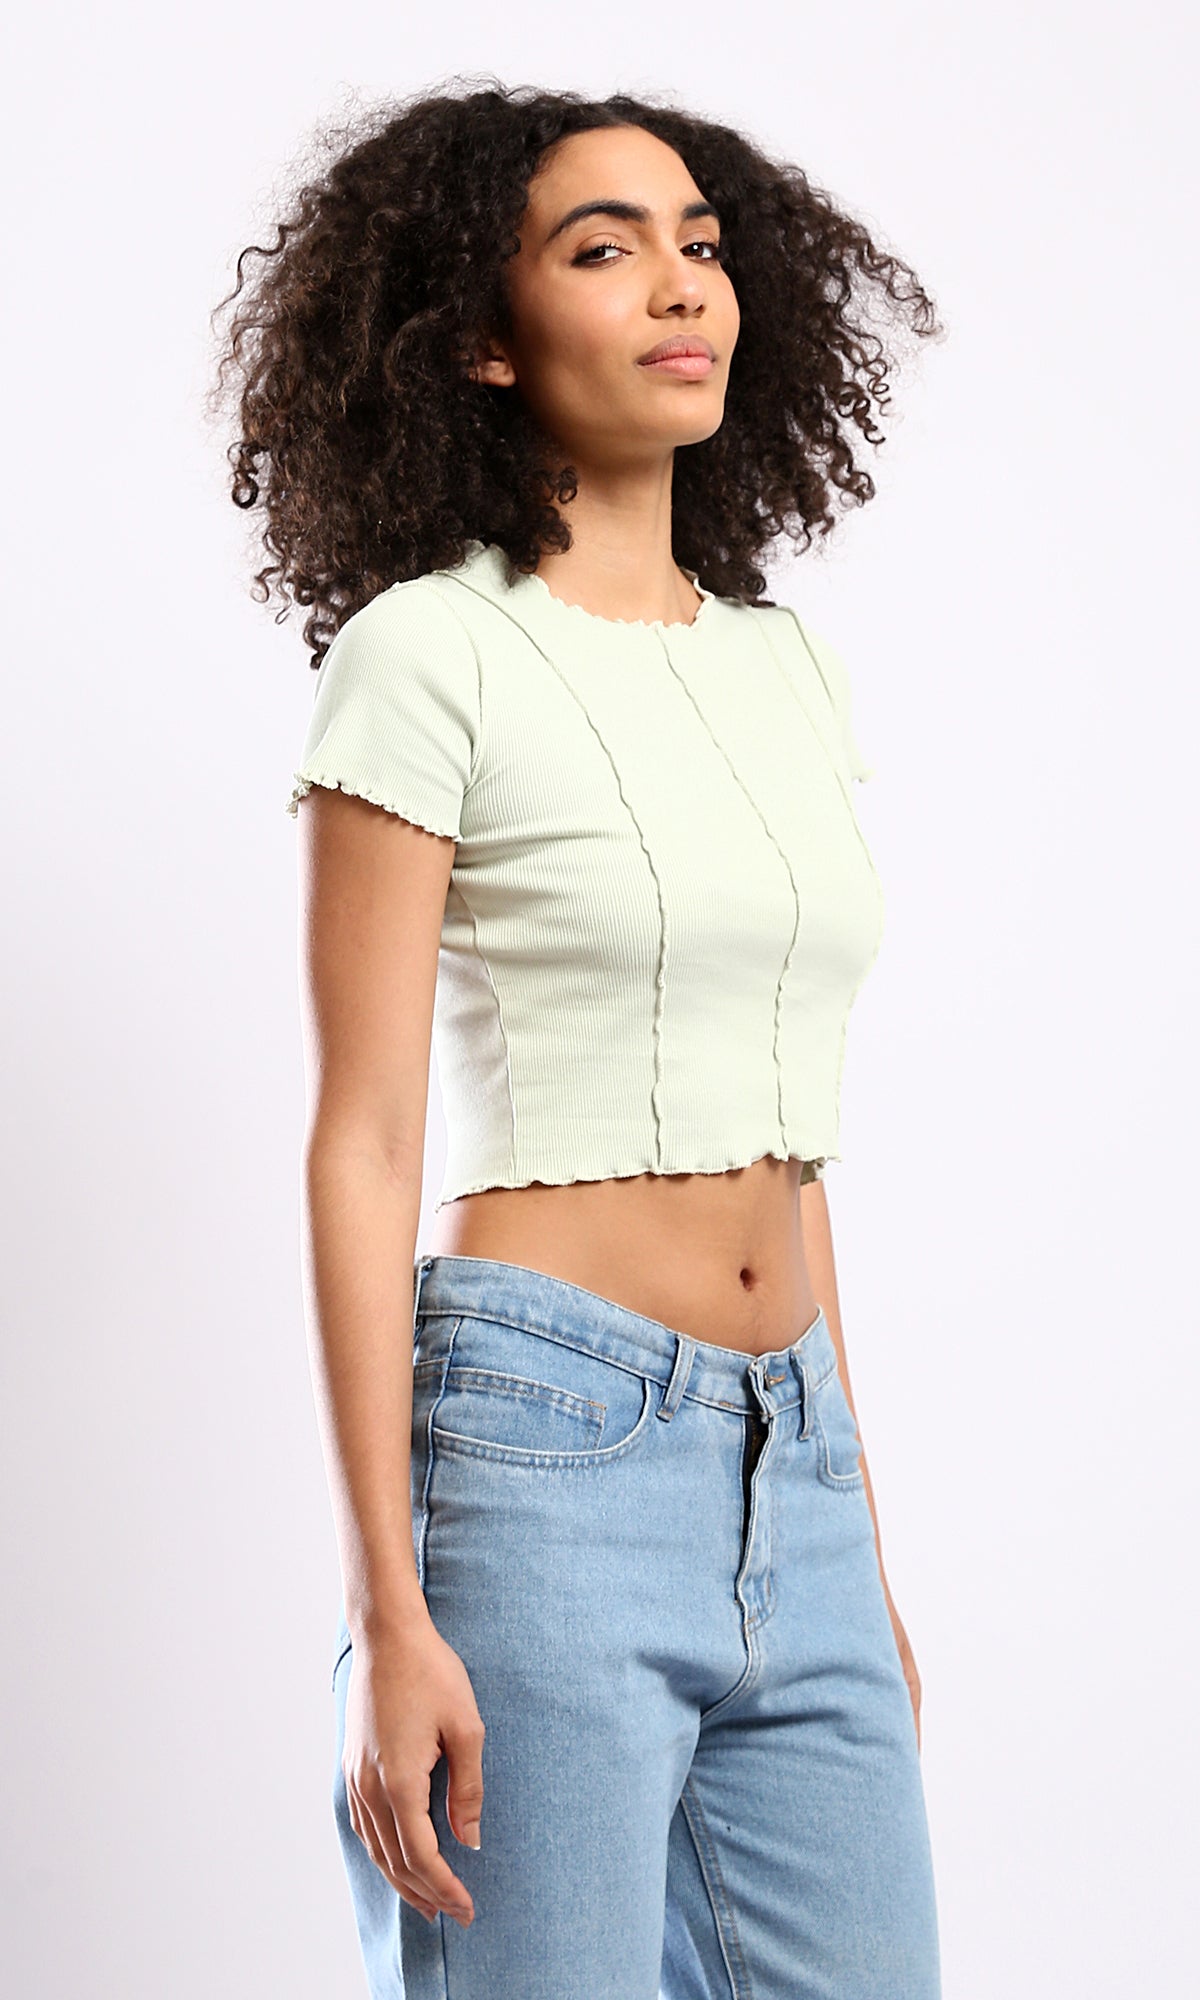 O182021 Slip On Ribbed Pastel Green Cropped Top